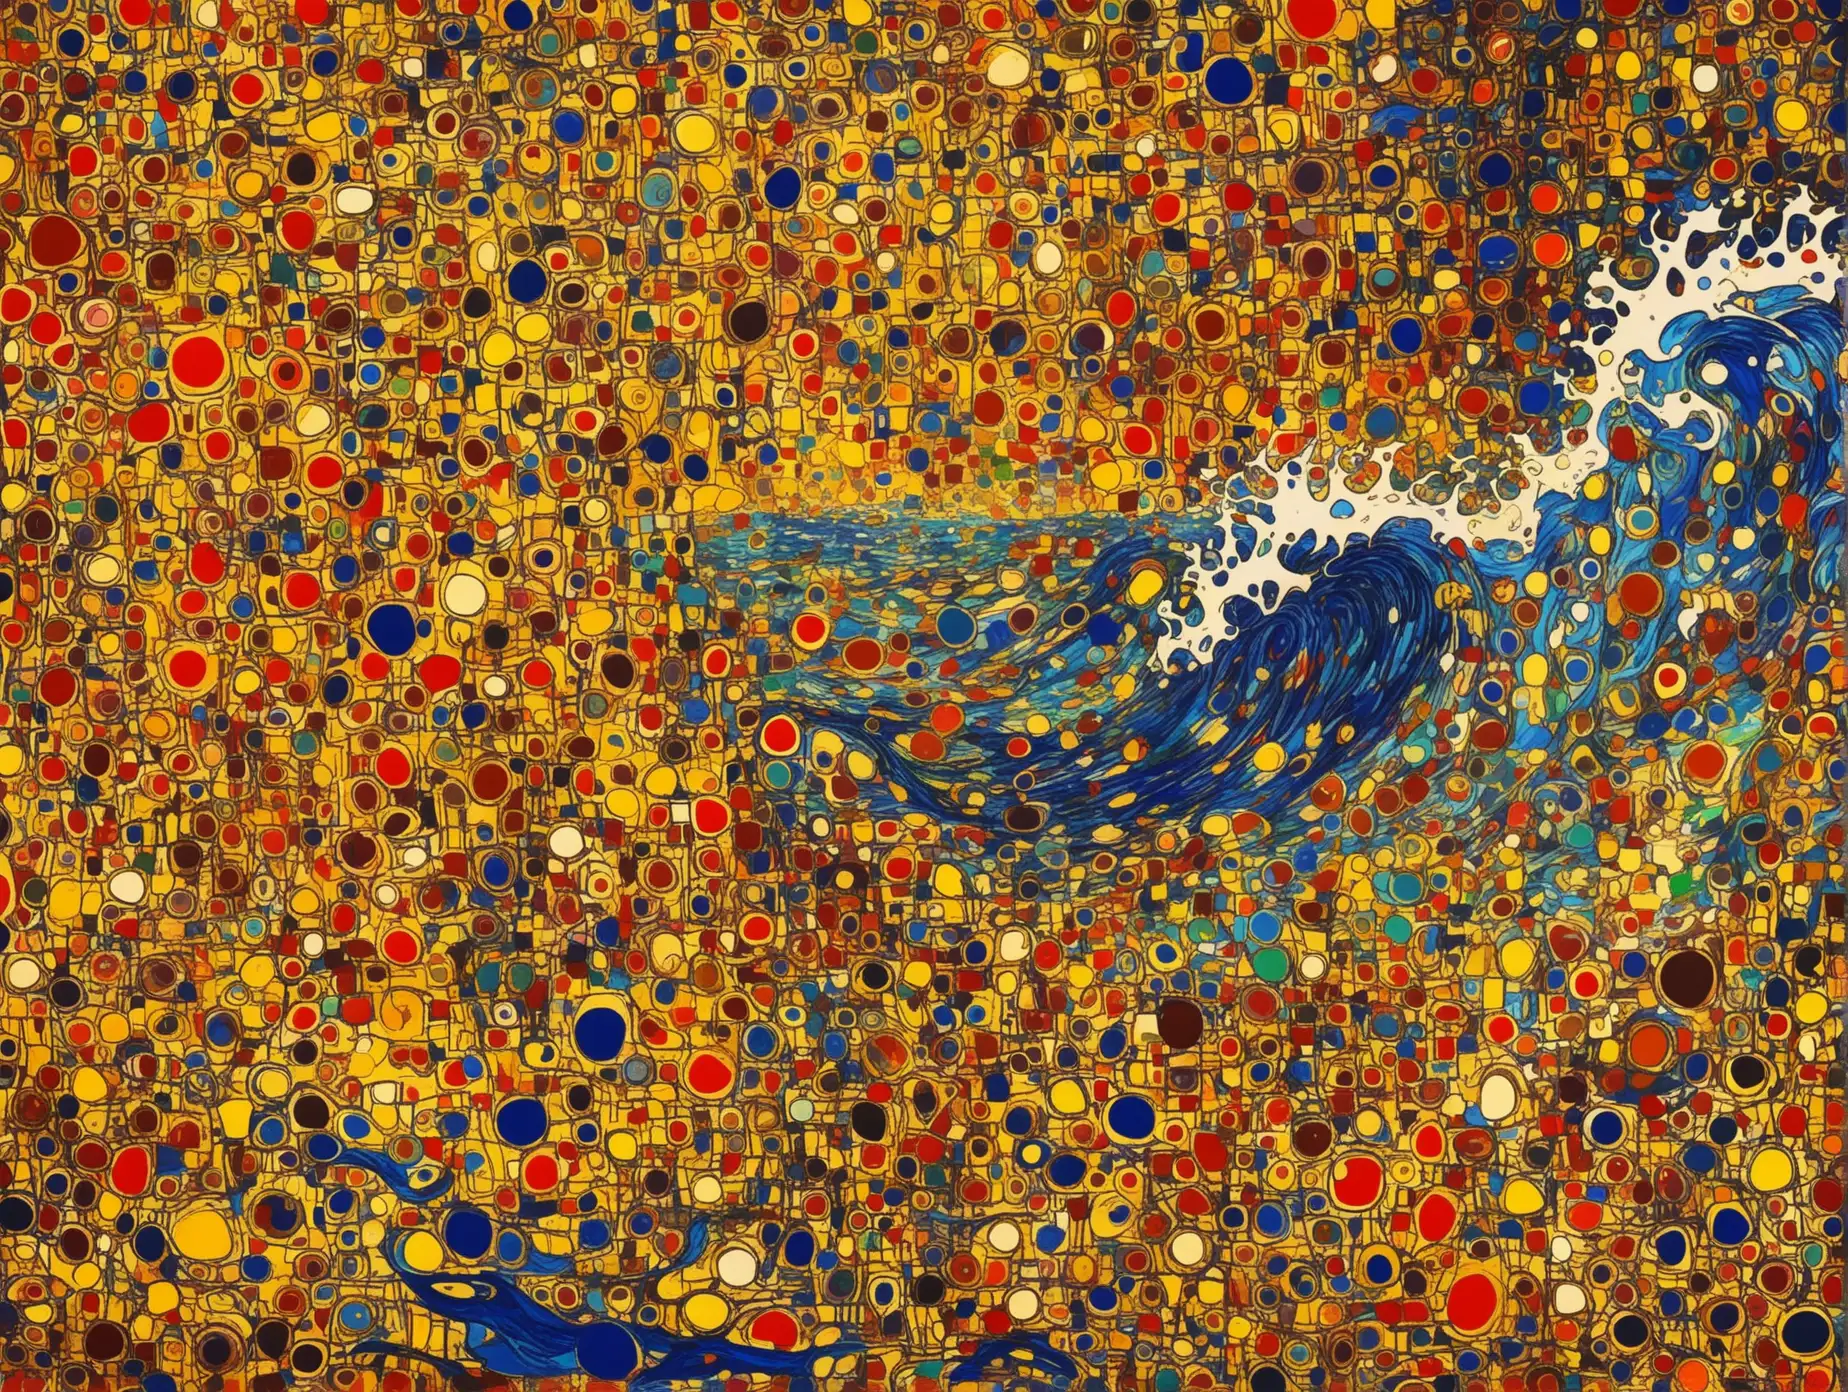  THe SEA IN STYLE OF KUSTAZ KLIMT AND JACKSON POLLOCK PSYCHEDELIC, CRAZY BACKGROUND GOLD MESSY,    
BLUE THE SEA THE SEA 
LESS BUSY MORE RED AND YELLOW

